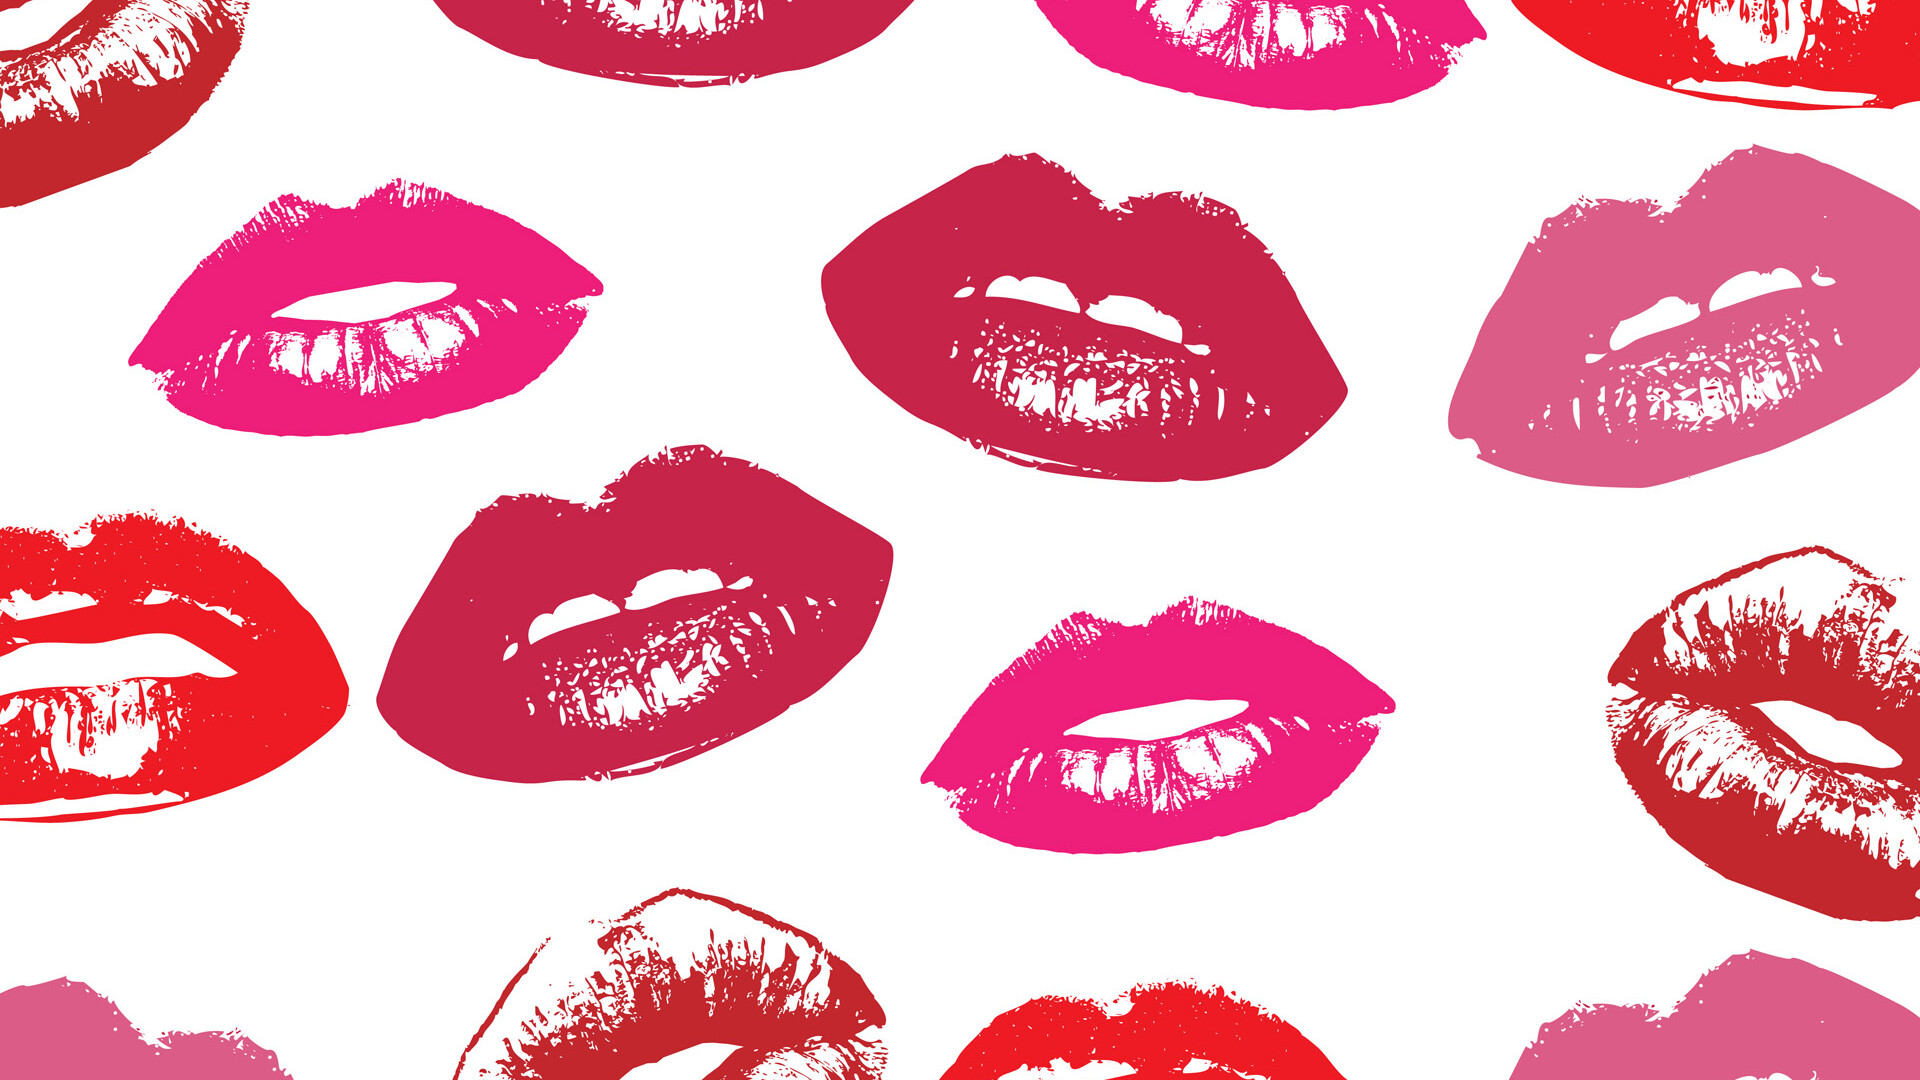 Lipstick: Glossy lips imprint, Lipstick's shades, Coloured cosmetic applied to the lips. 1920x1080 Full HD Wallpaper.